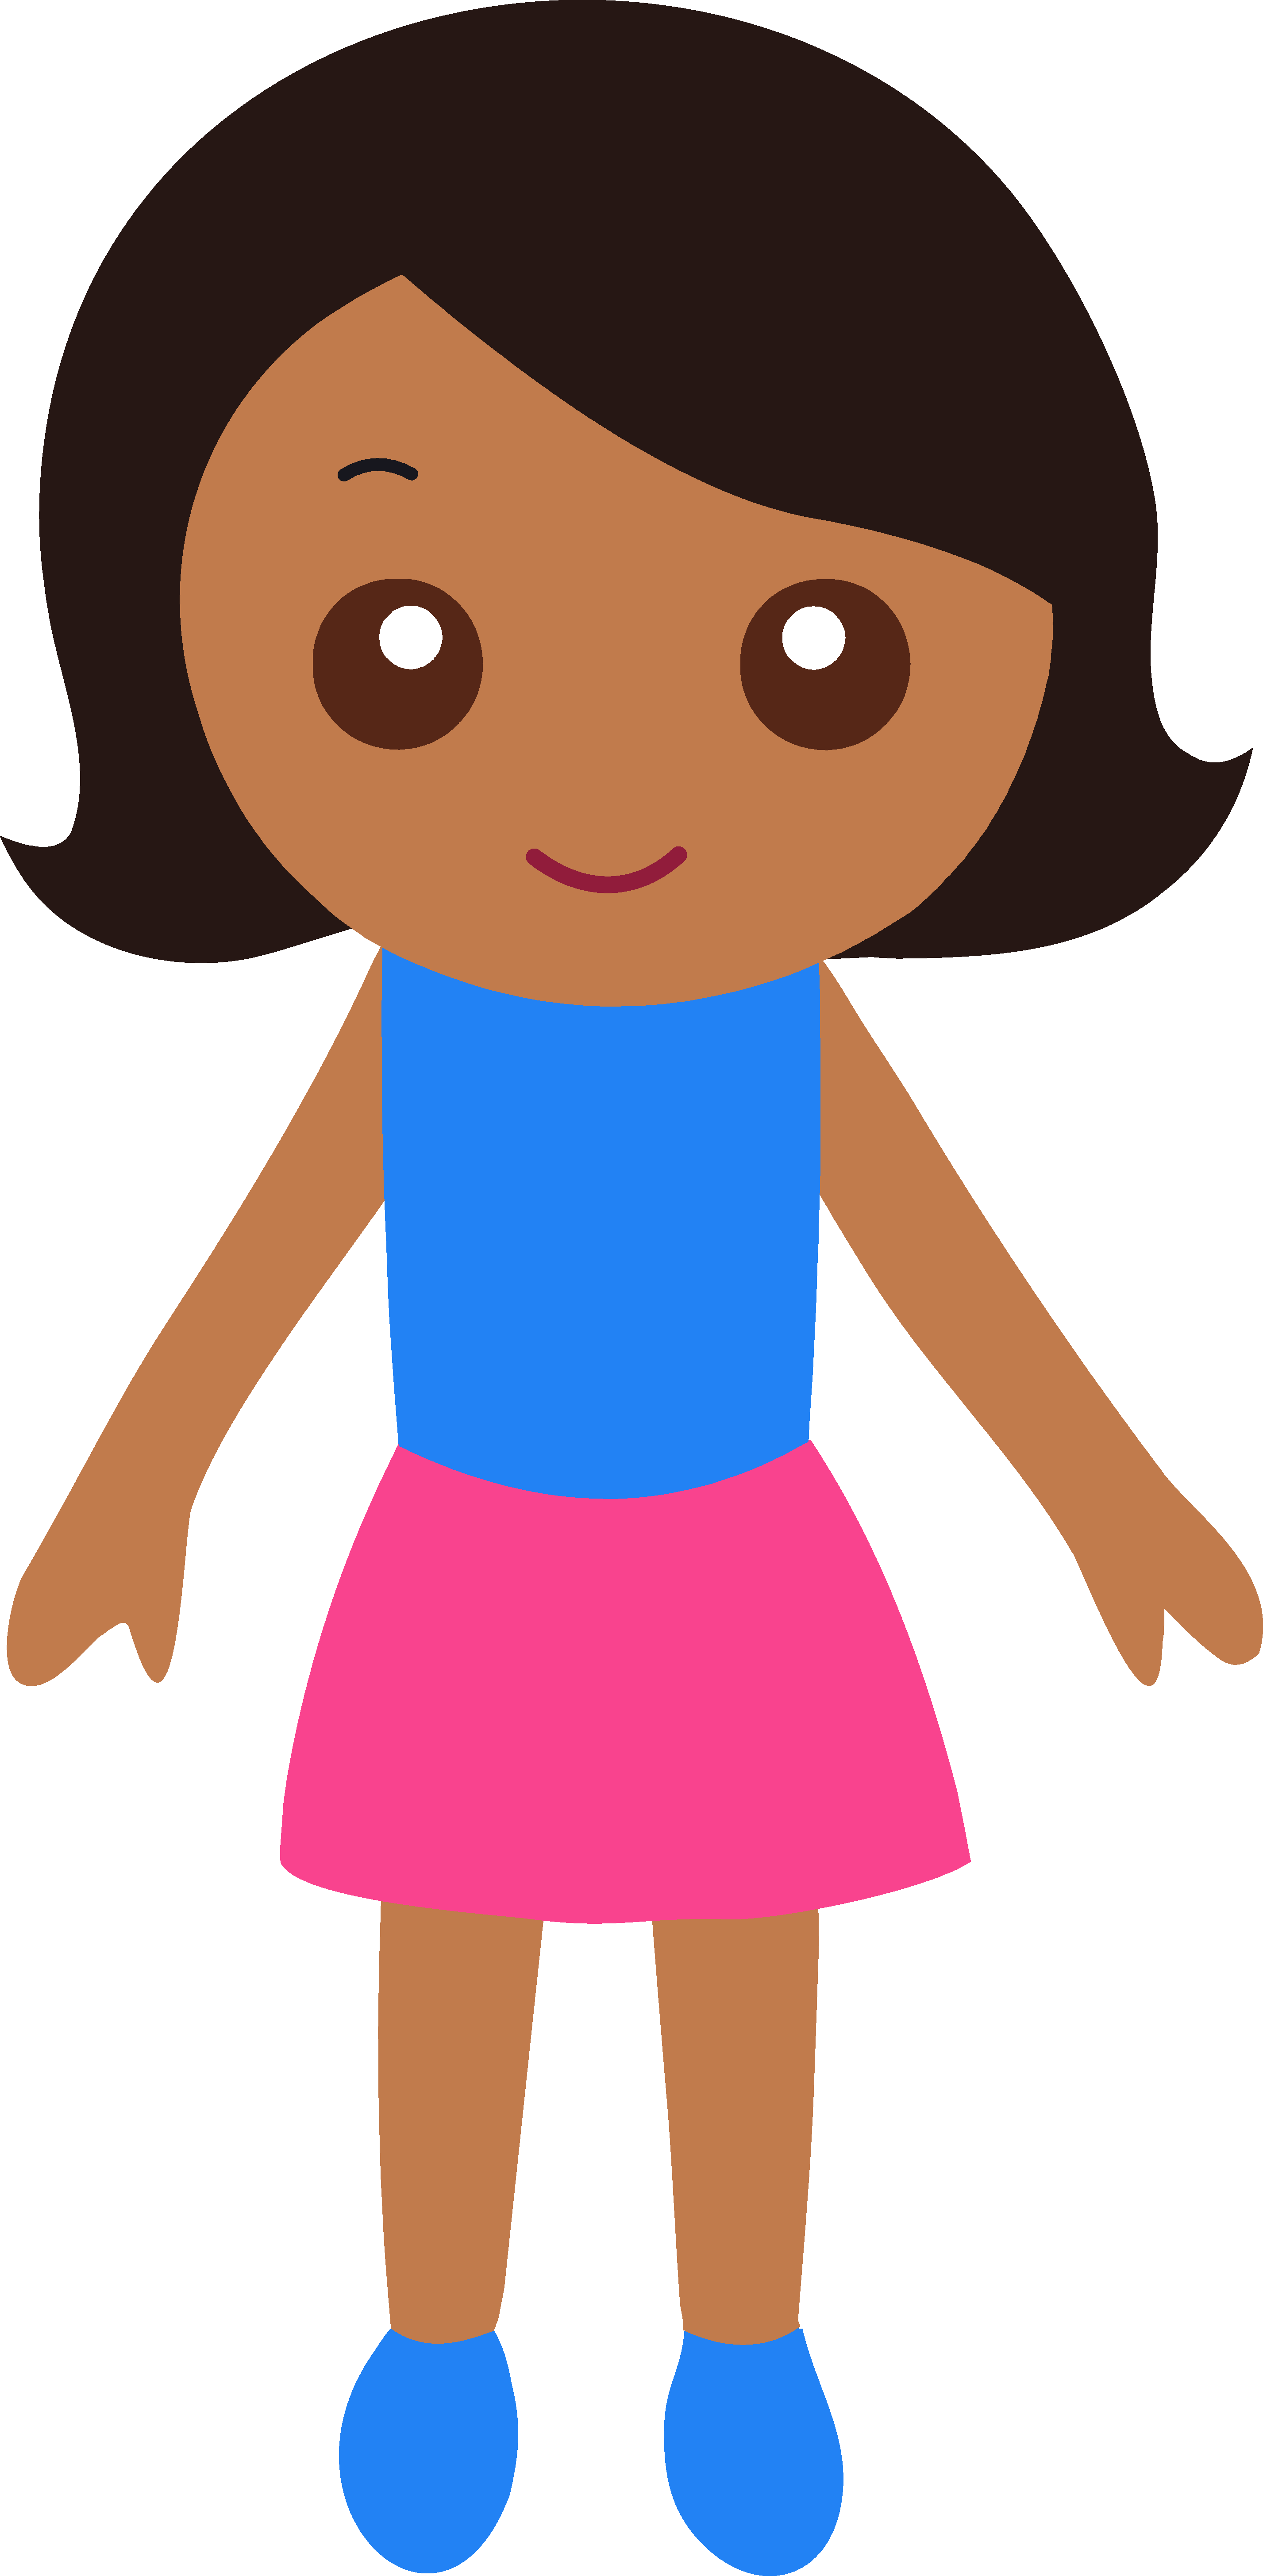 Girl With Blue Eyes And Brown Hair Clipart Posted On Monday